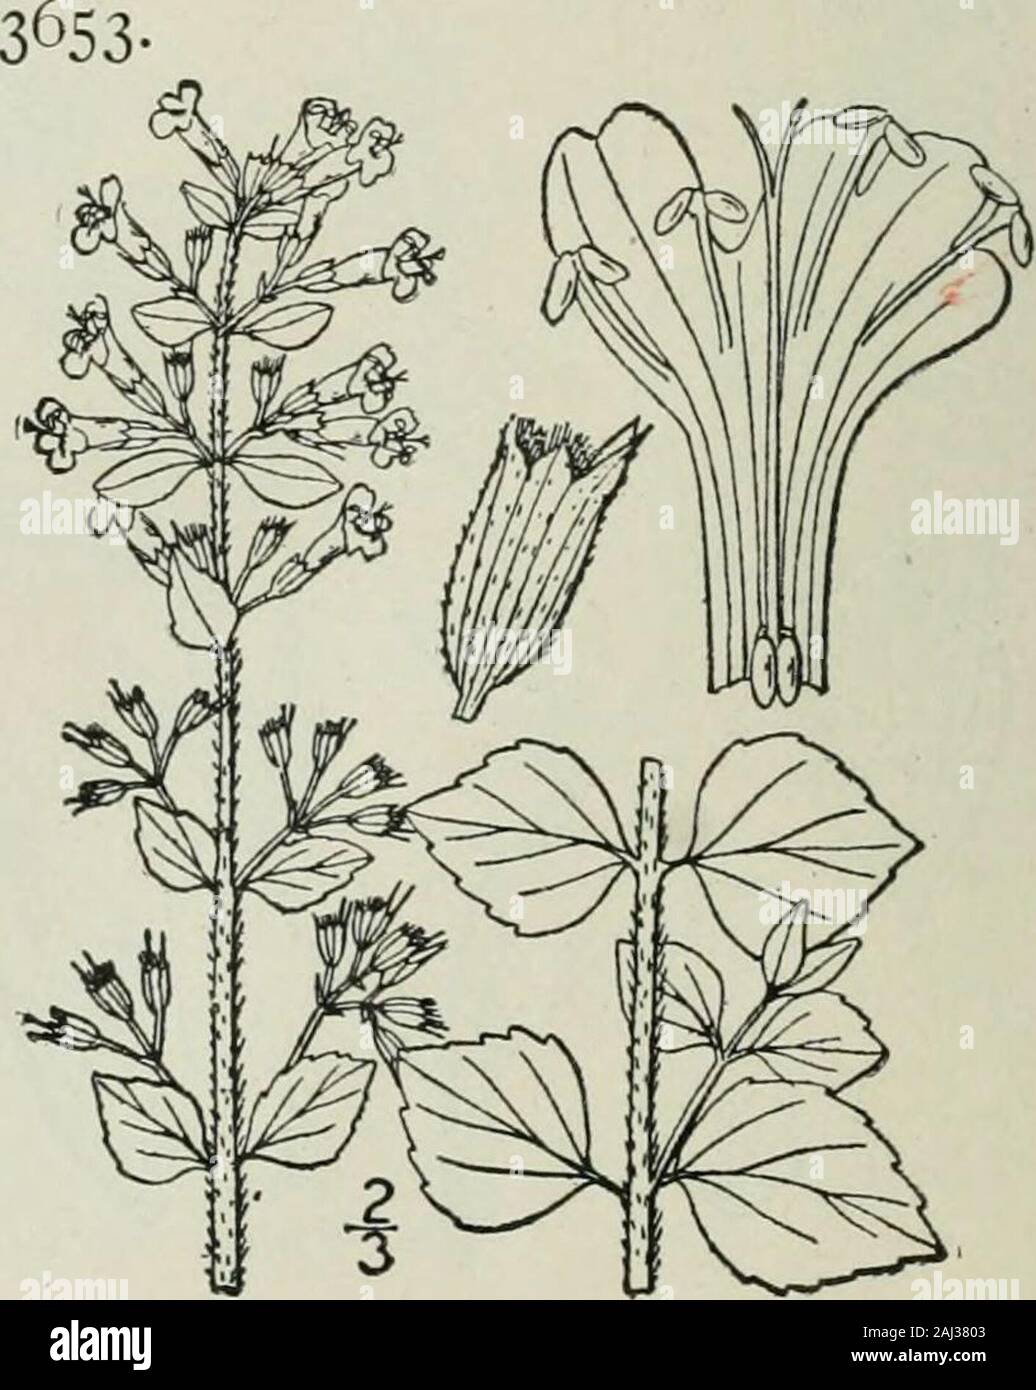 An illustrated flora of the northern United States, Canada and the British possessions : from Newfoundland to the parallel of the southern boundary of Virginia and from the Atlantic Ocean westward to the 102nd meridian . Genus 29. MINT FAMILY. 139 Clinopodium Calamintha (L.) Kuntze, the cala-?mint of the Old World, with larger leaves and flow-ers, admitted into our first edition, is not known inthe wild state within our area. 3, Clinopodium Acinos (L.) Kuntze.Basil-thyme. Basil Balm. Fig. 3654. Tliymus Acinos L. Sp. PI. 591. 1753.Melissa Acinos Benth. Lab. Gen. & Sp. 389. 1834.Cal. Acinos Bent Stock Photo